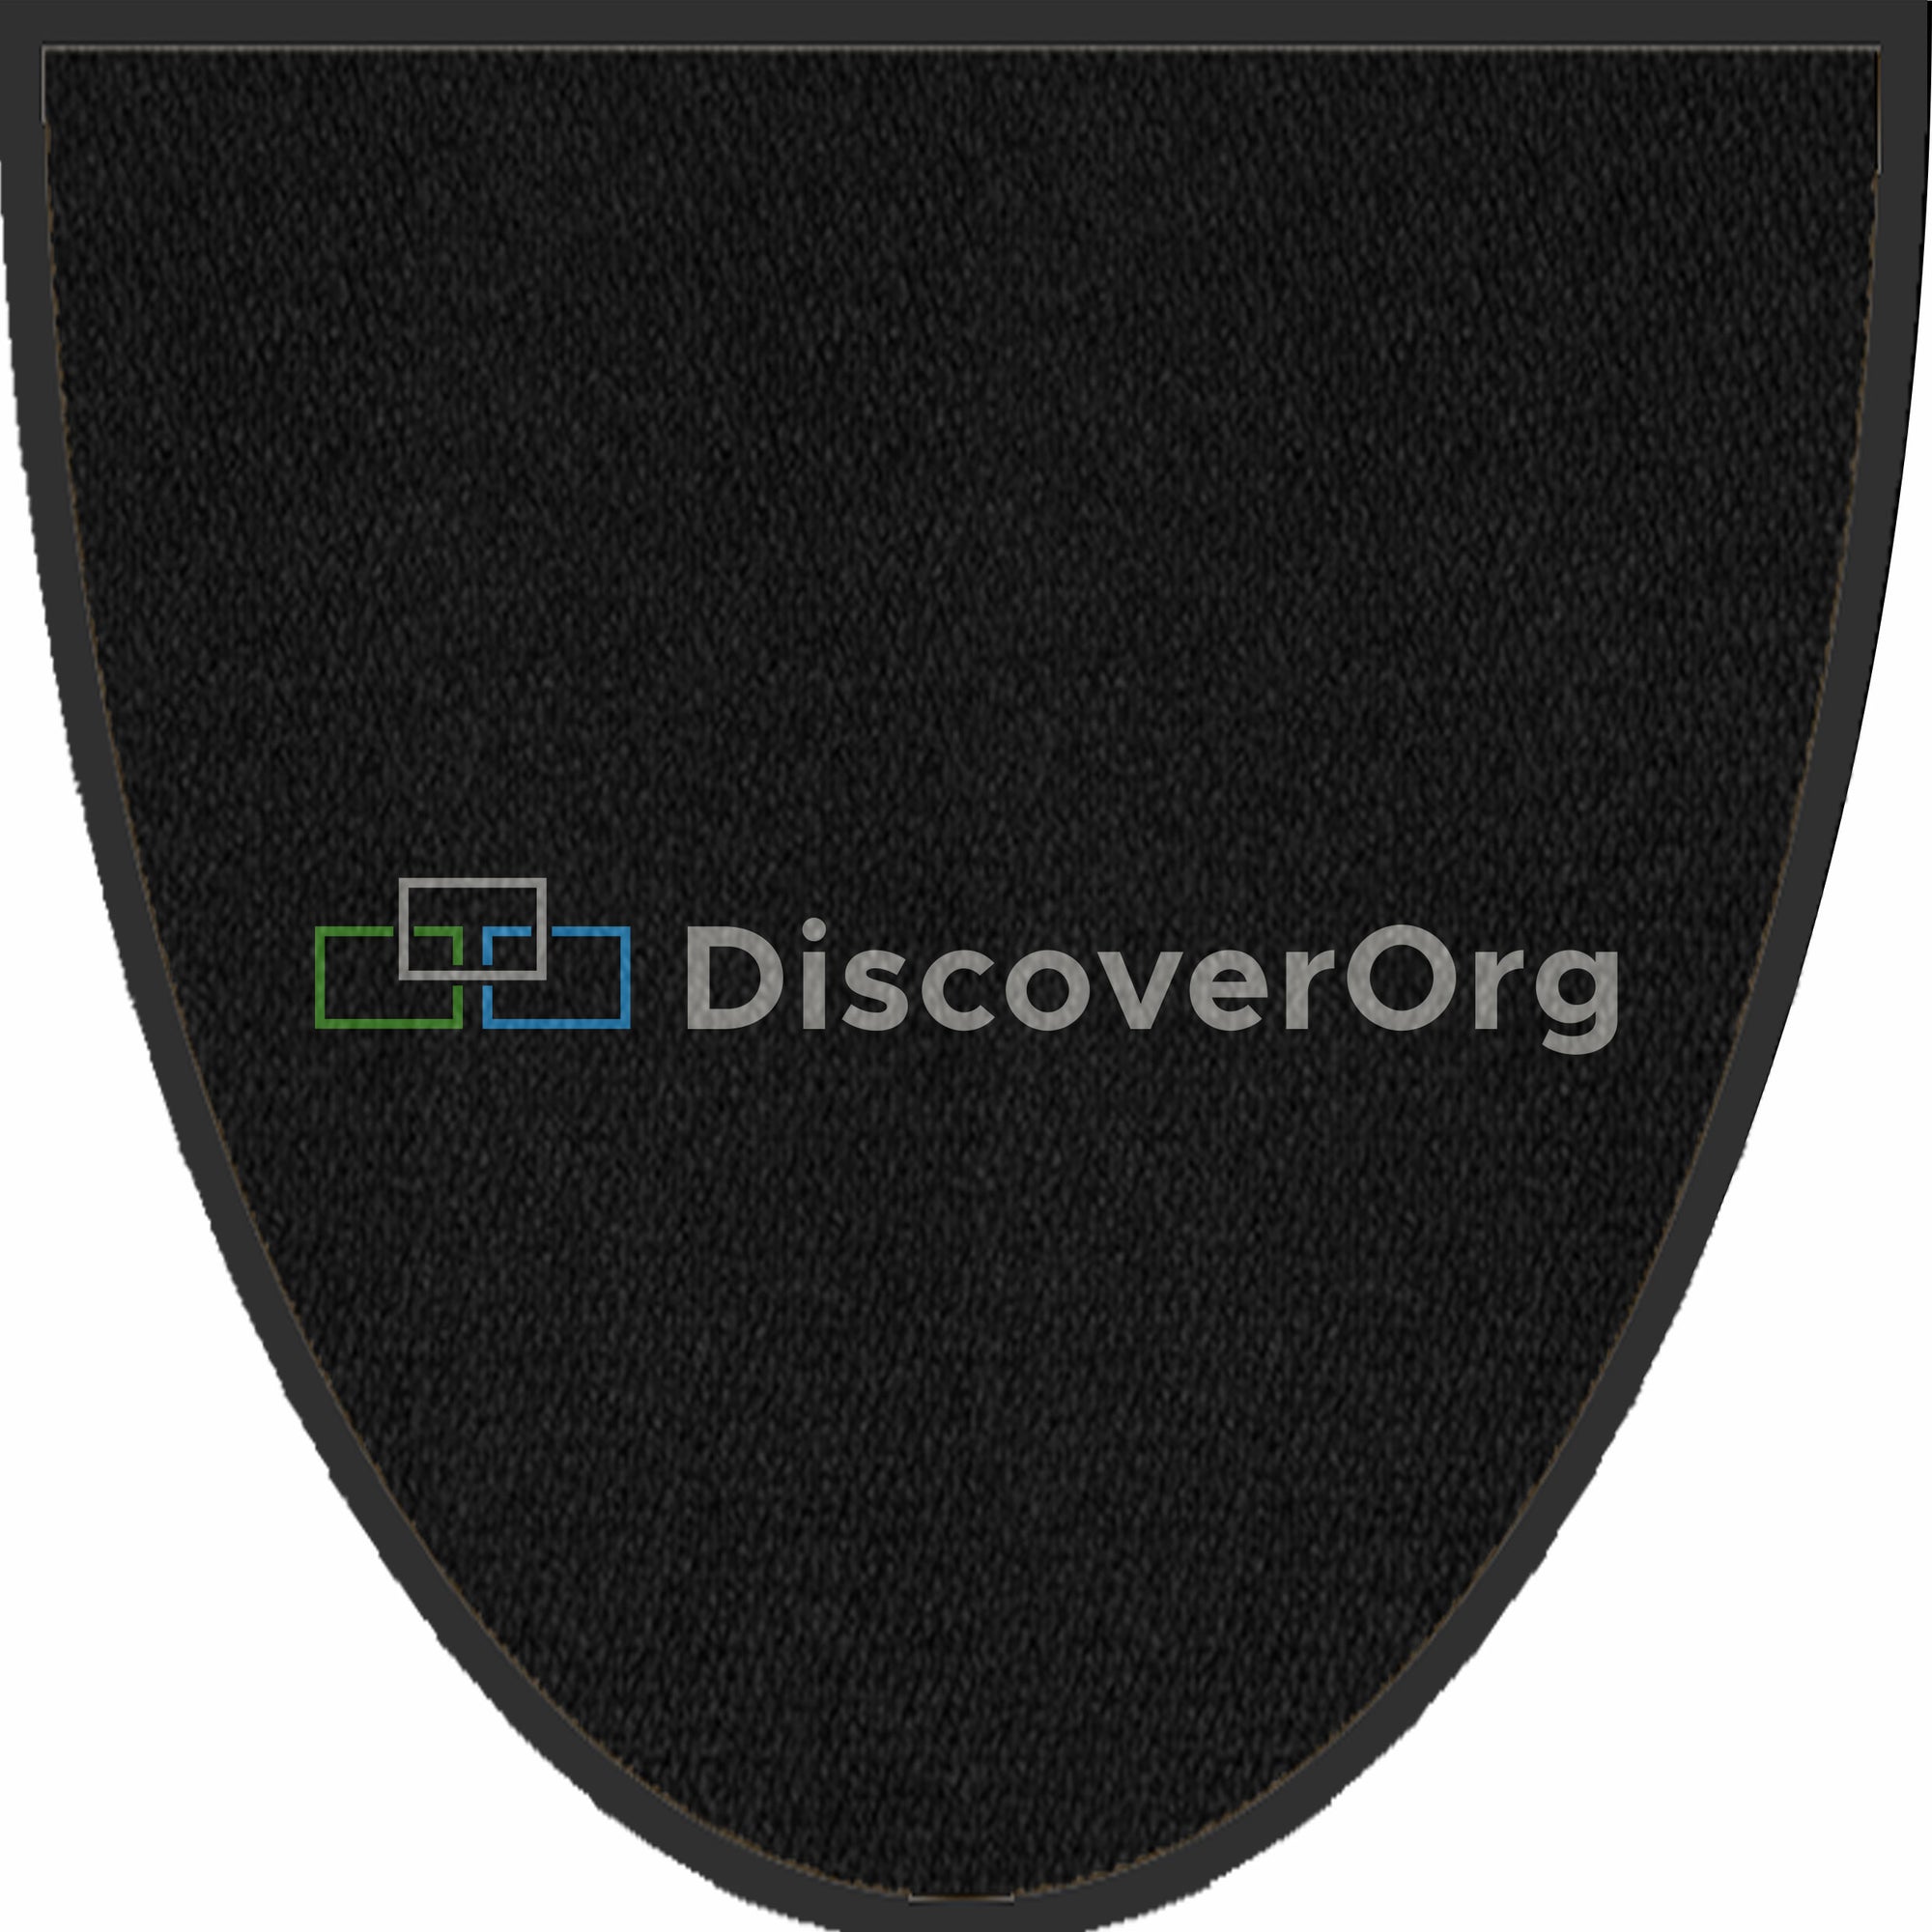 DiscoverOrg § 11 X 11 Luxury Berber Inlay - The Personalized Doormats Company